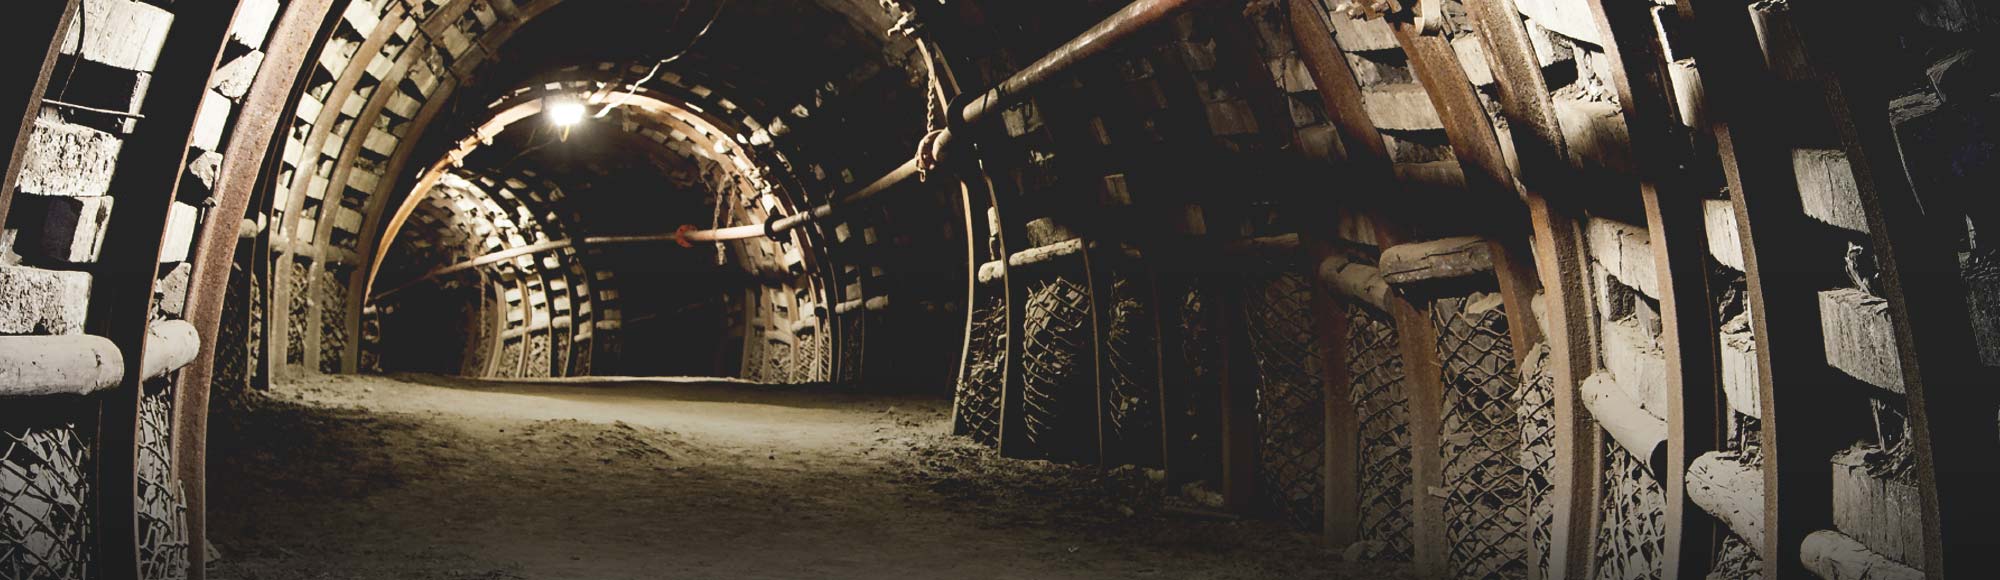 View of Inside a Mine